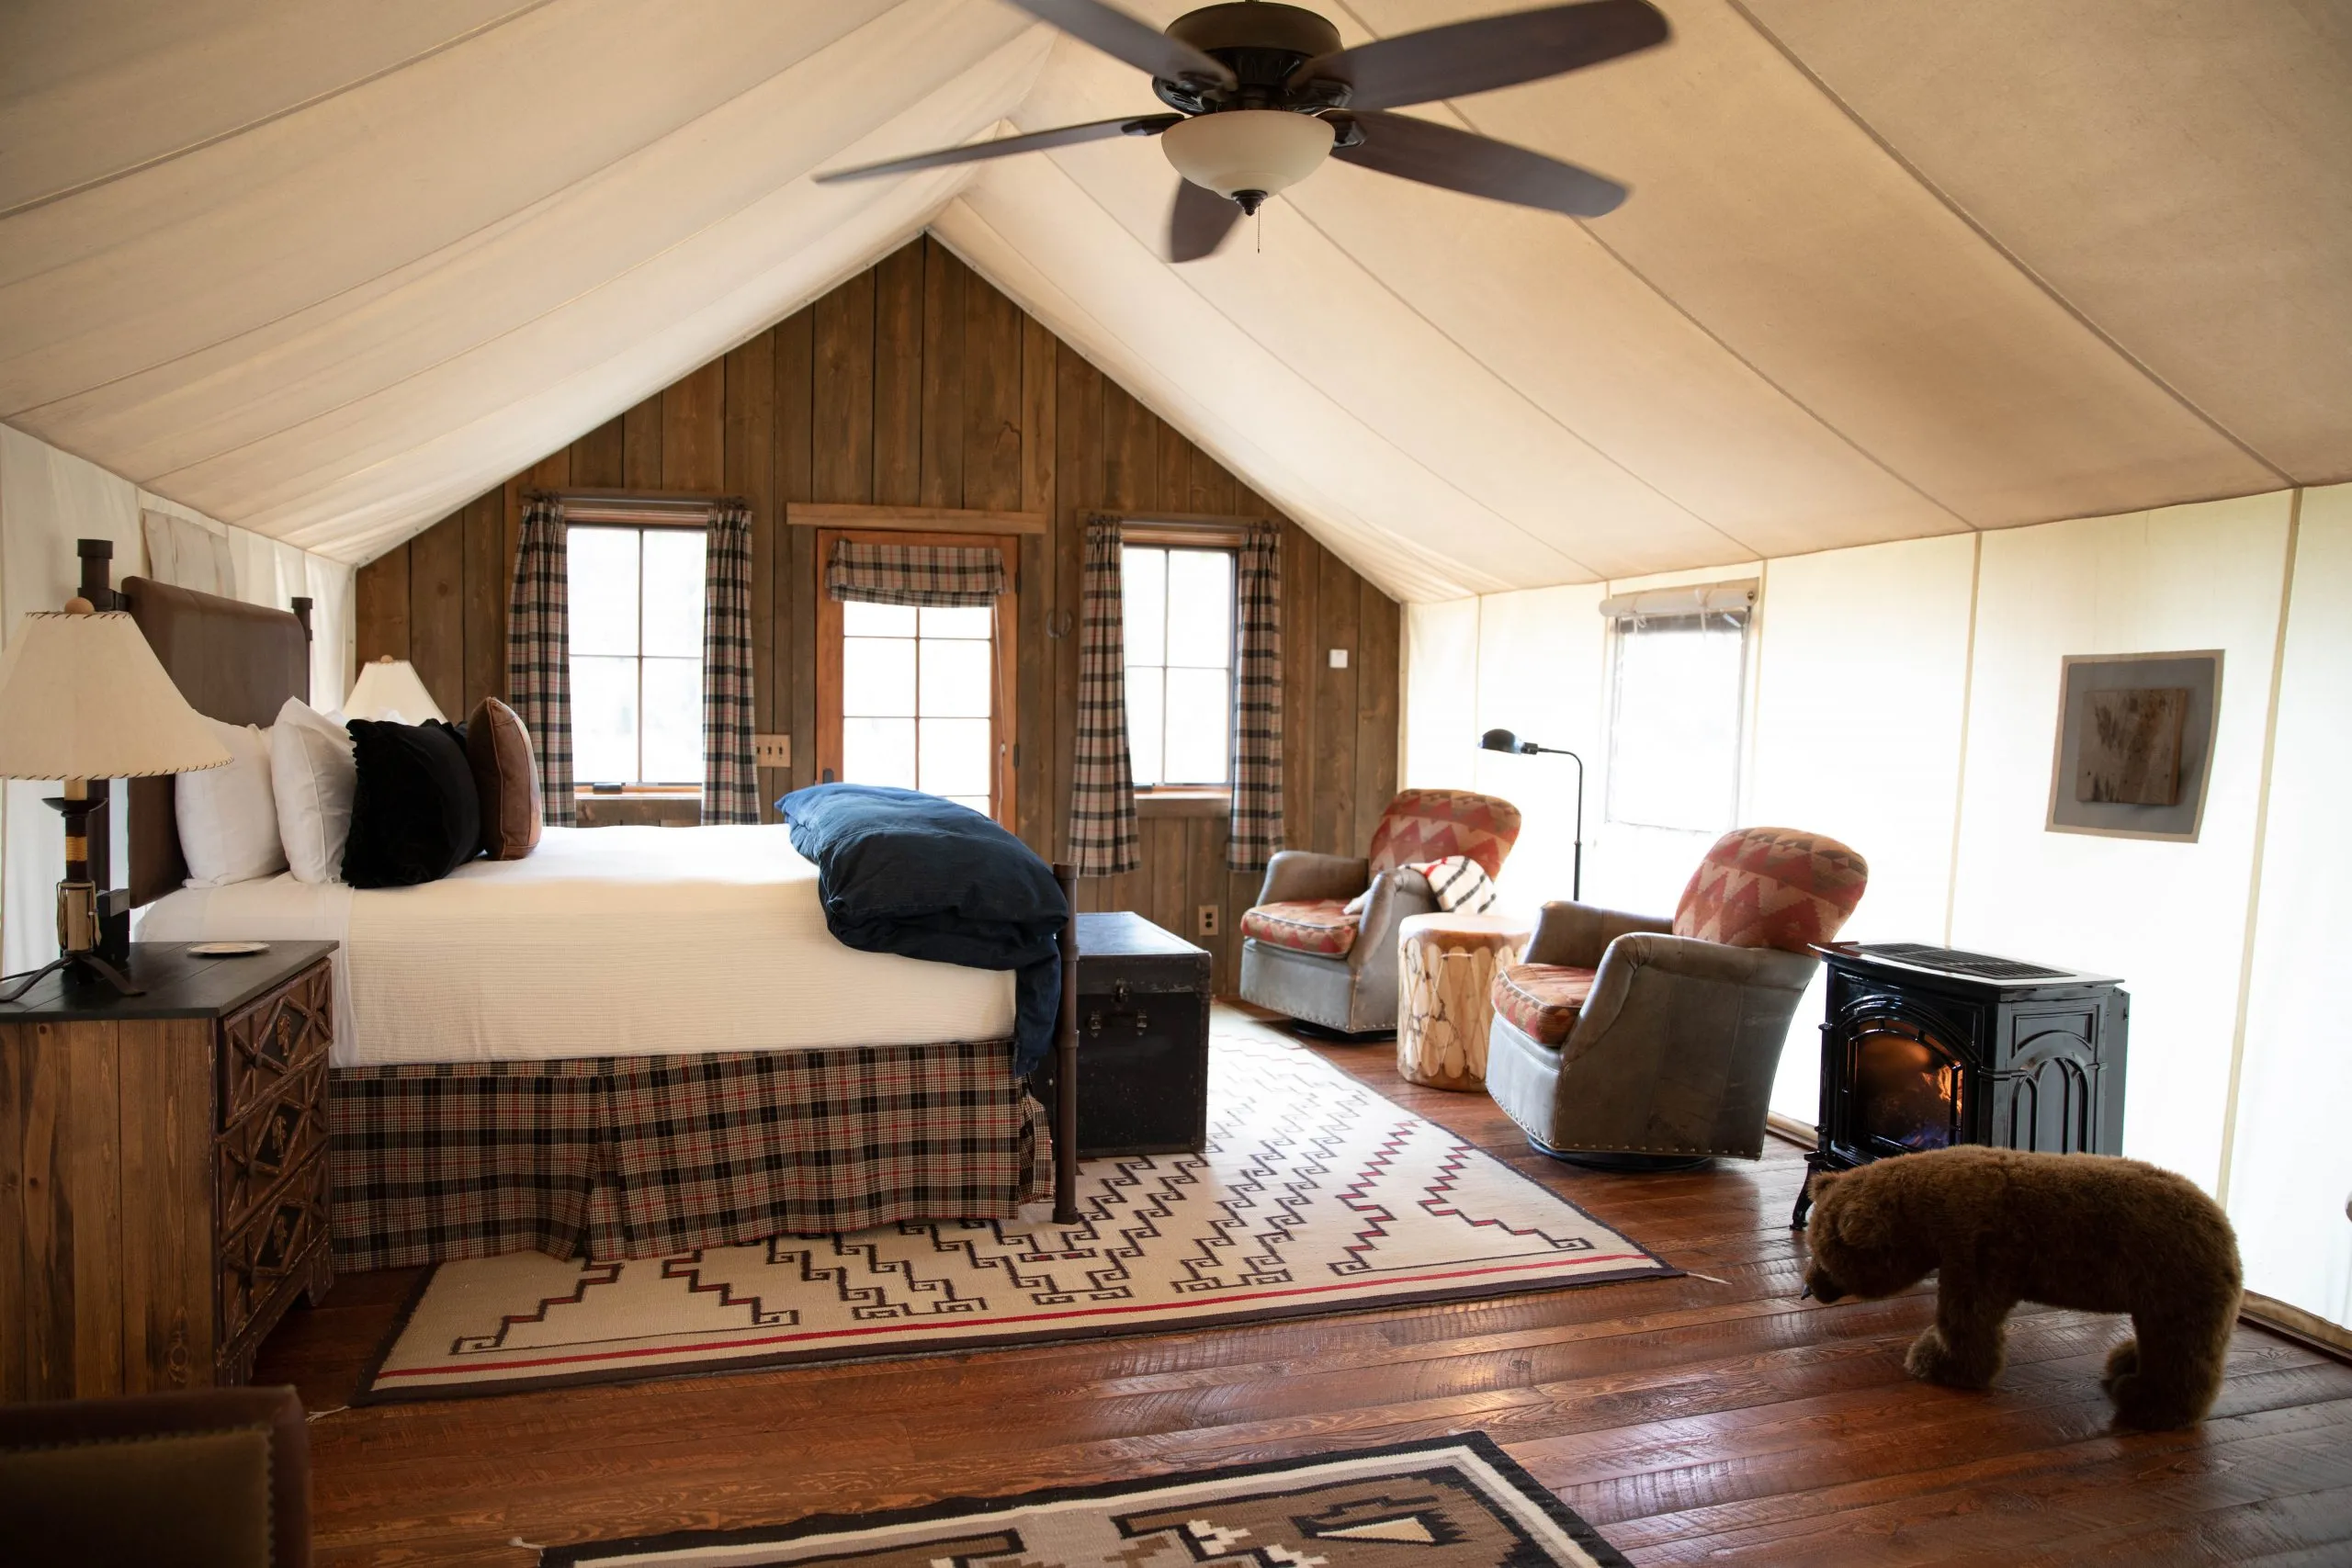 Bedroom inside a tented cabin space with a ceiling fan and portable fireplace